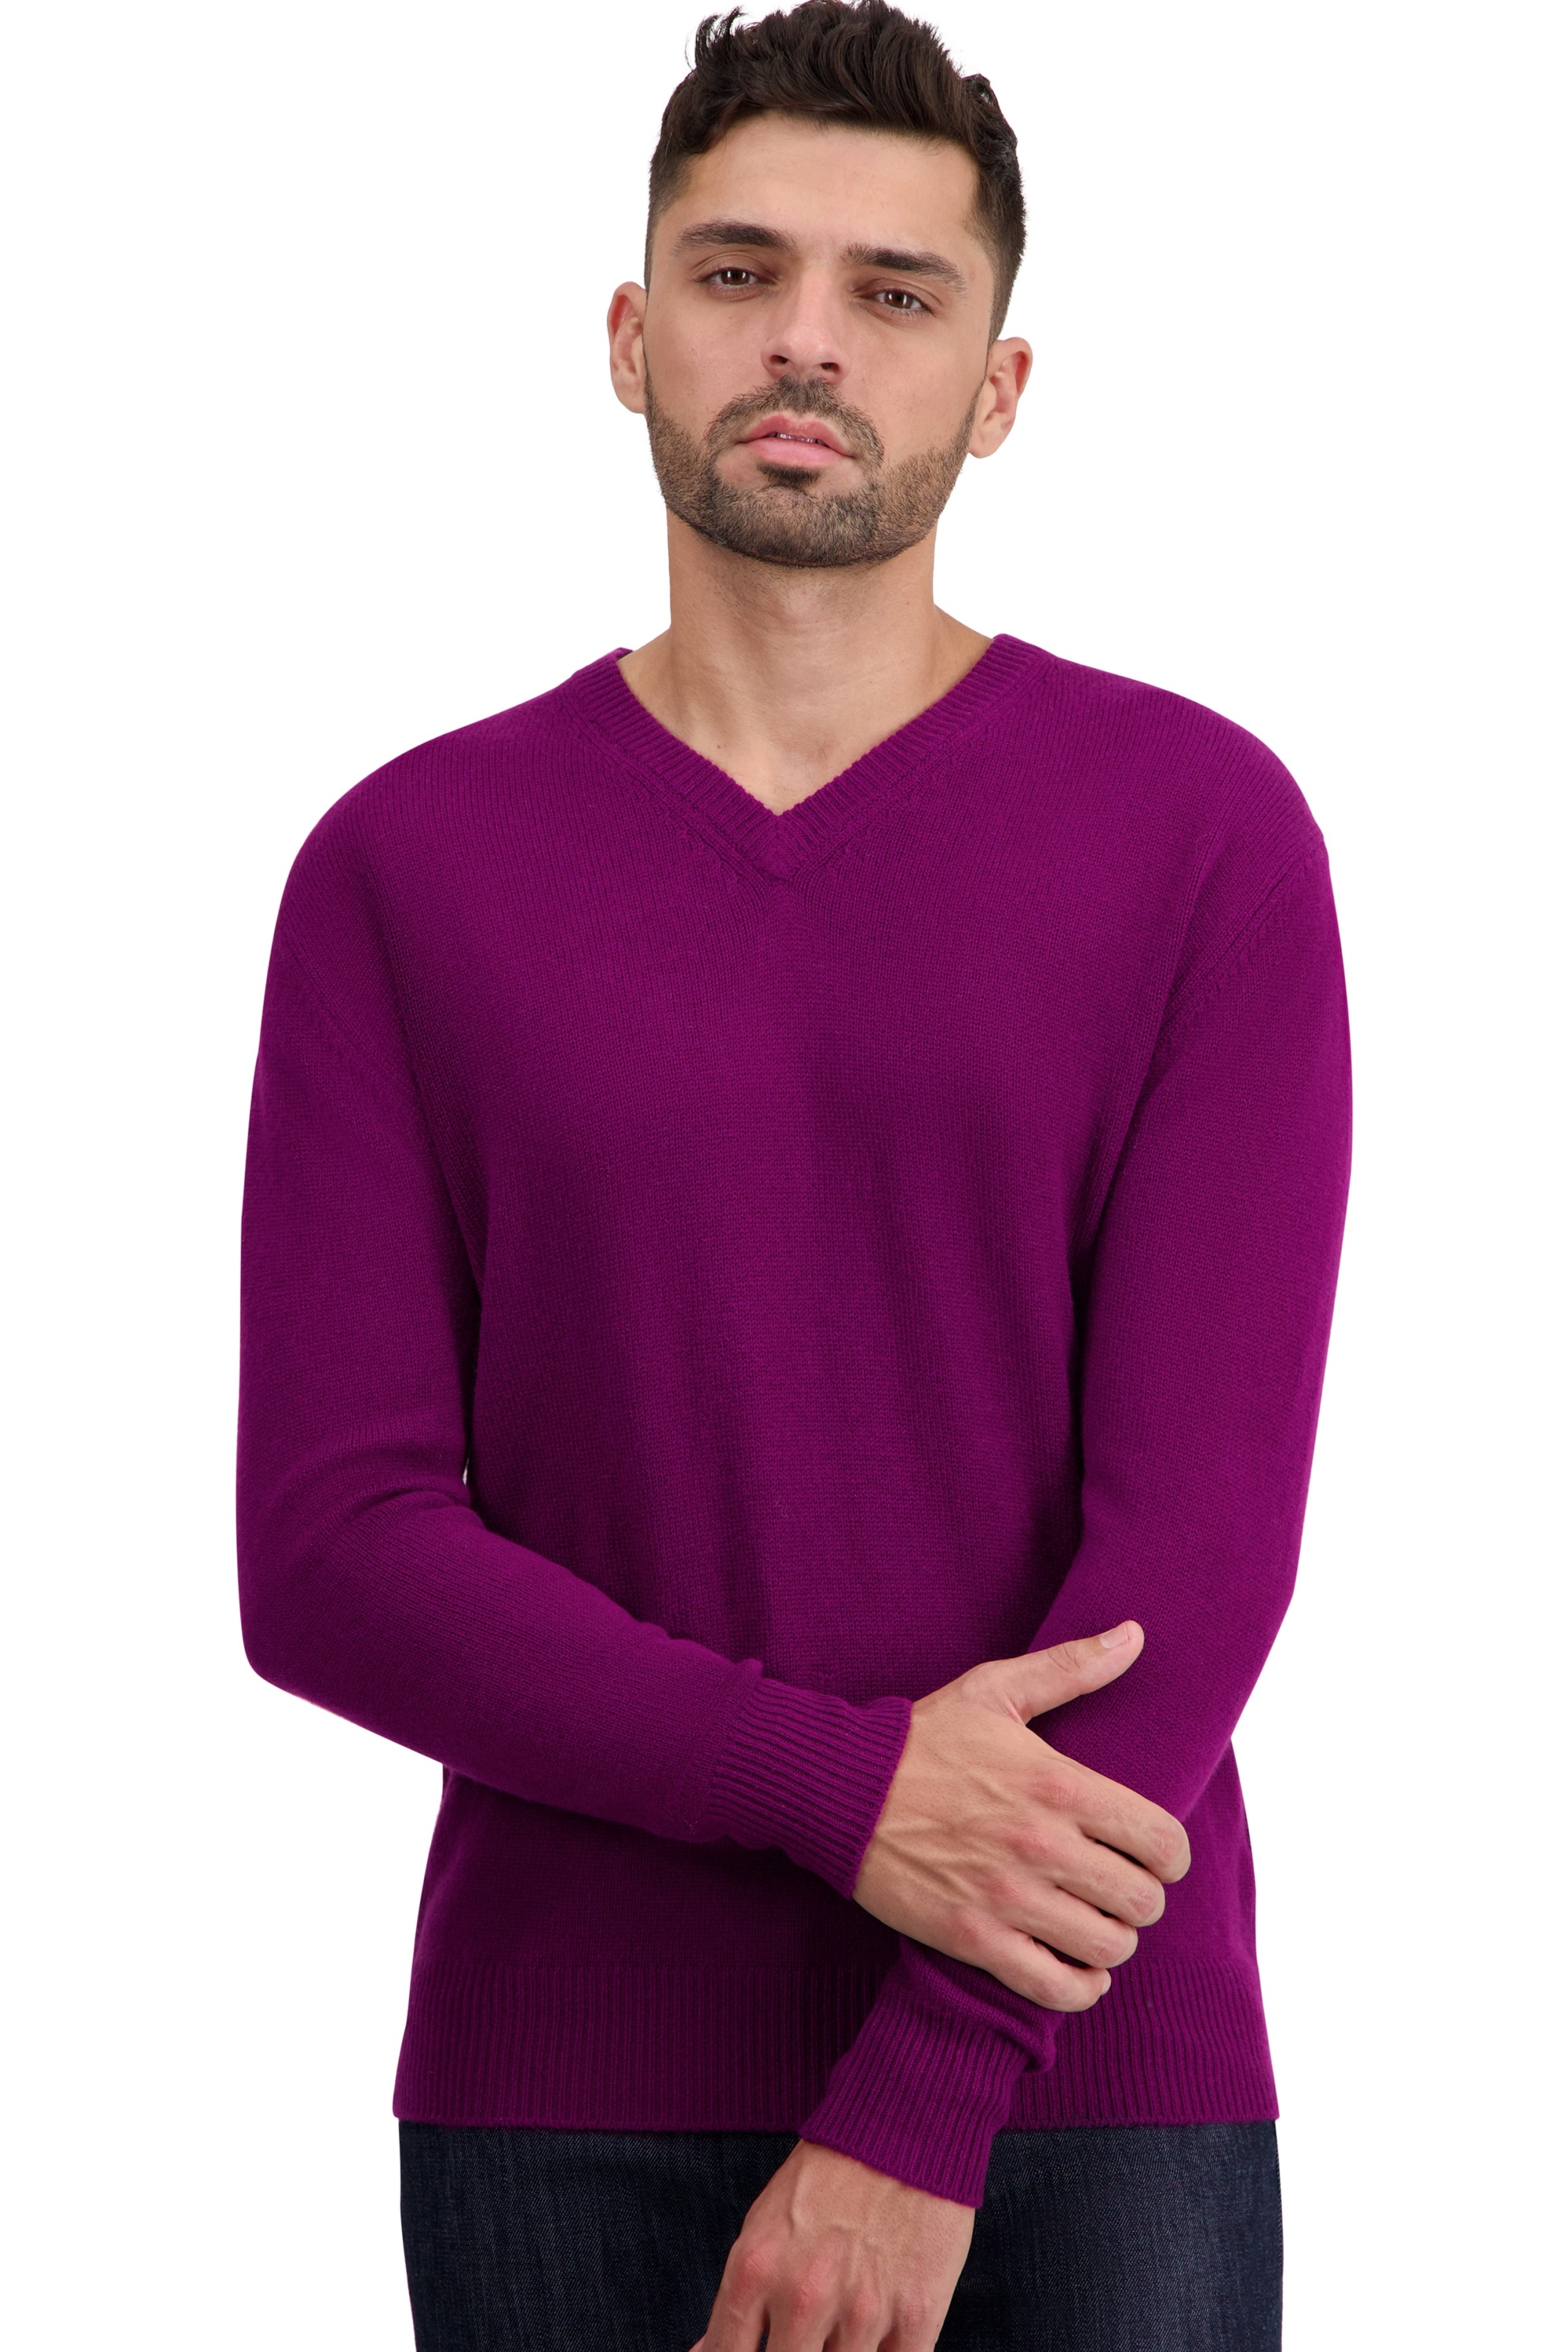 Cashmere men basic sweaters at low prices tour first rich claret l